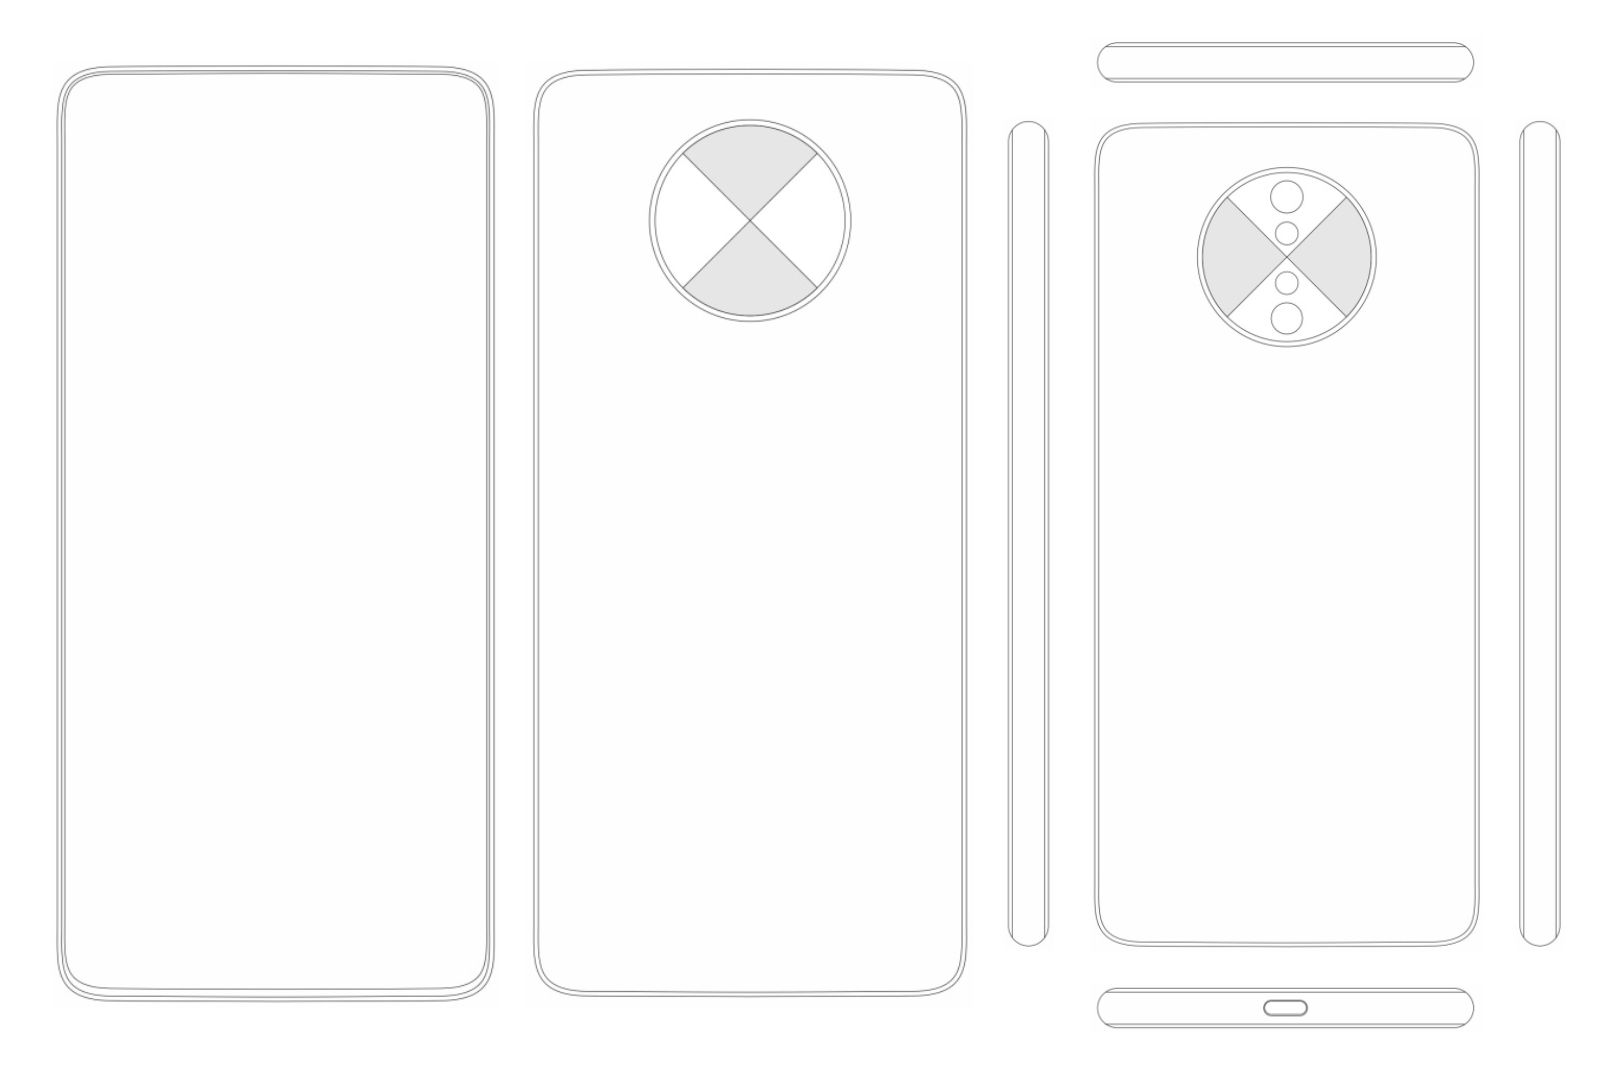 OnePlus patent reveals phone with no notch hole-punch or pop-up camera image 1